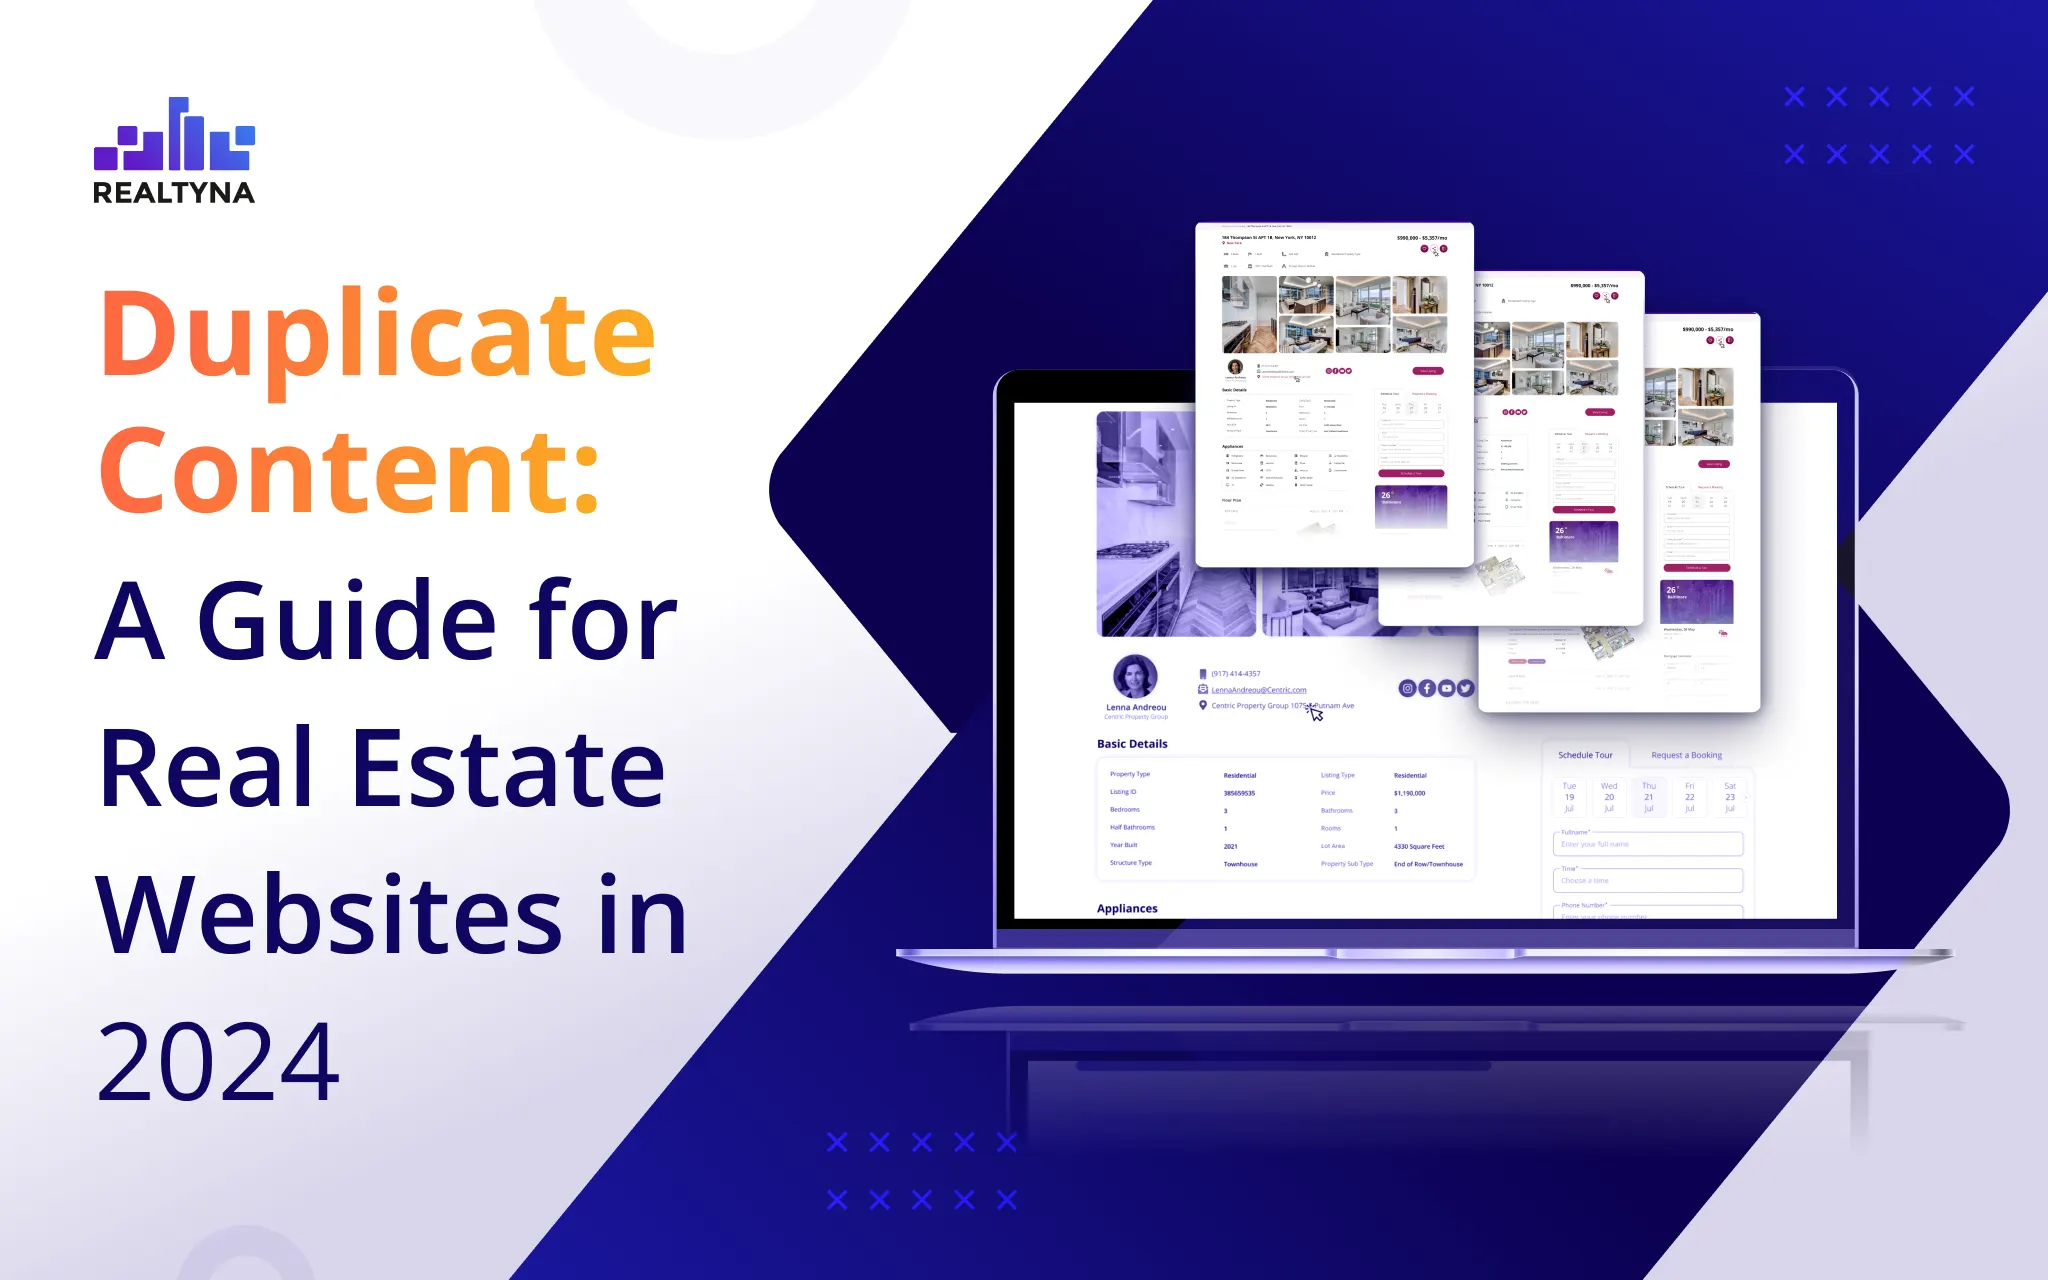 Duplicate Content: A Guide for Real Estate Websites in 2024